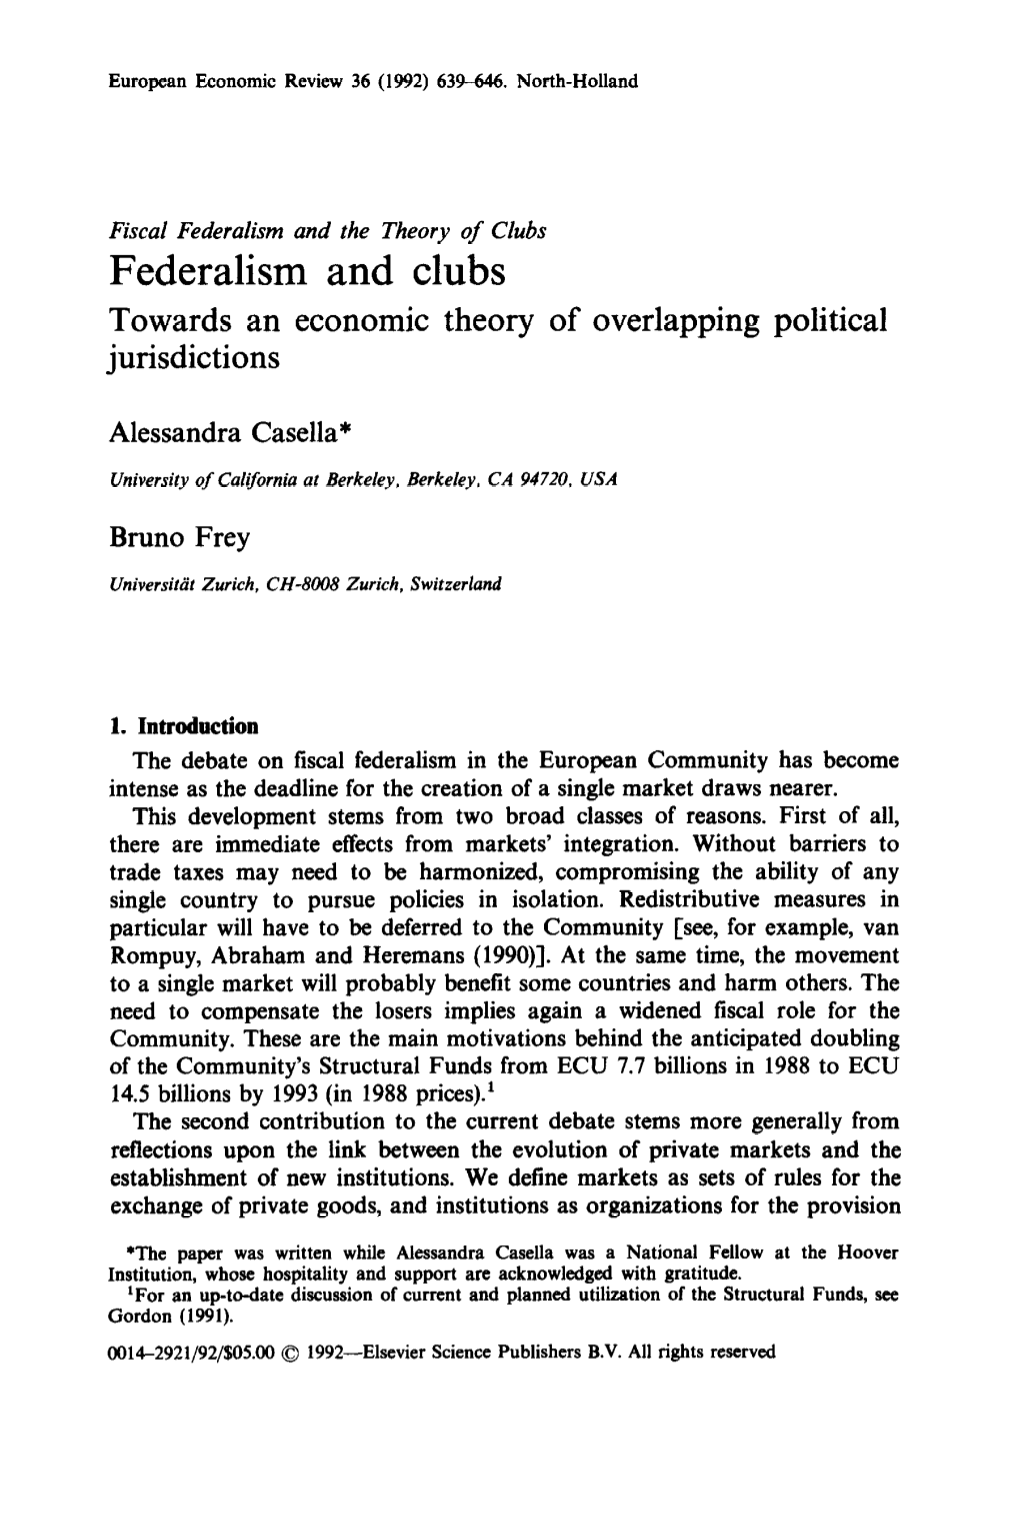 Federalism and Clubs Towards an Economic Theory of Overlapping Political Jurisdictions